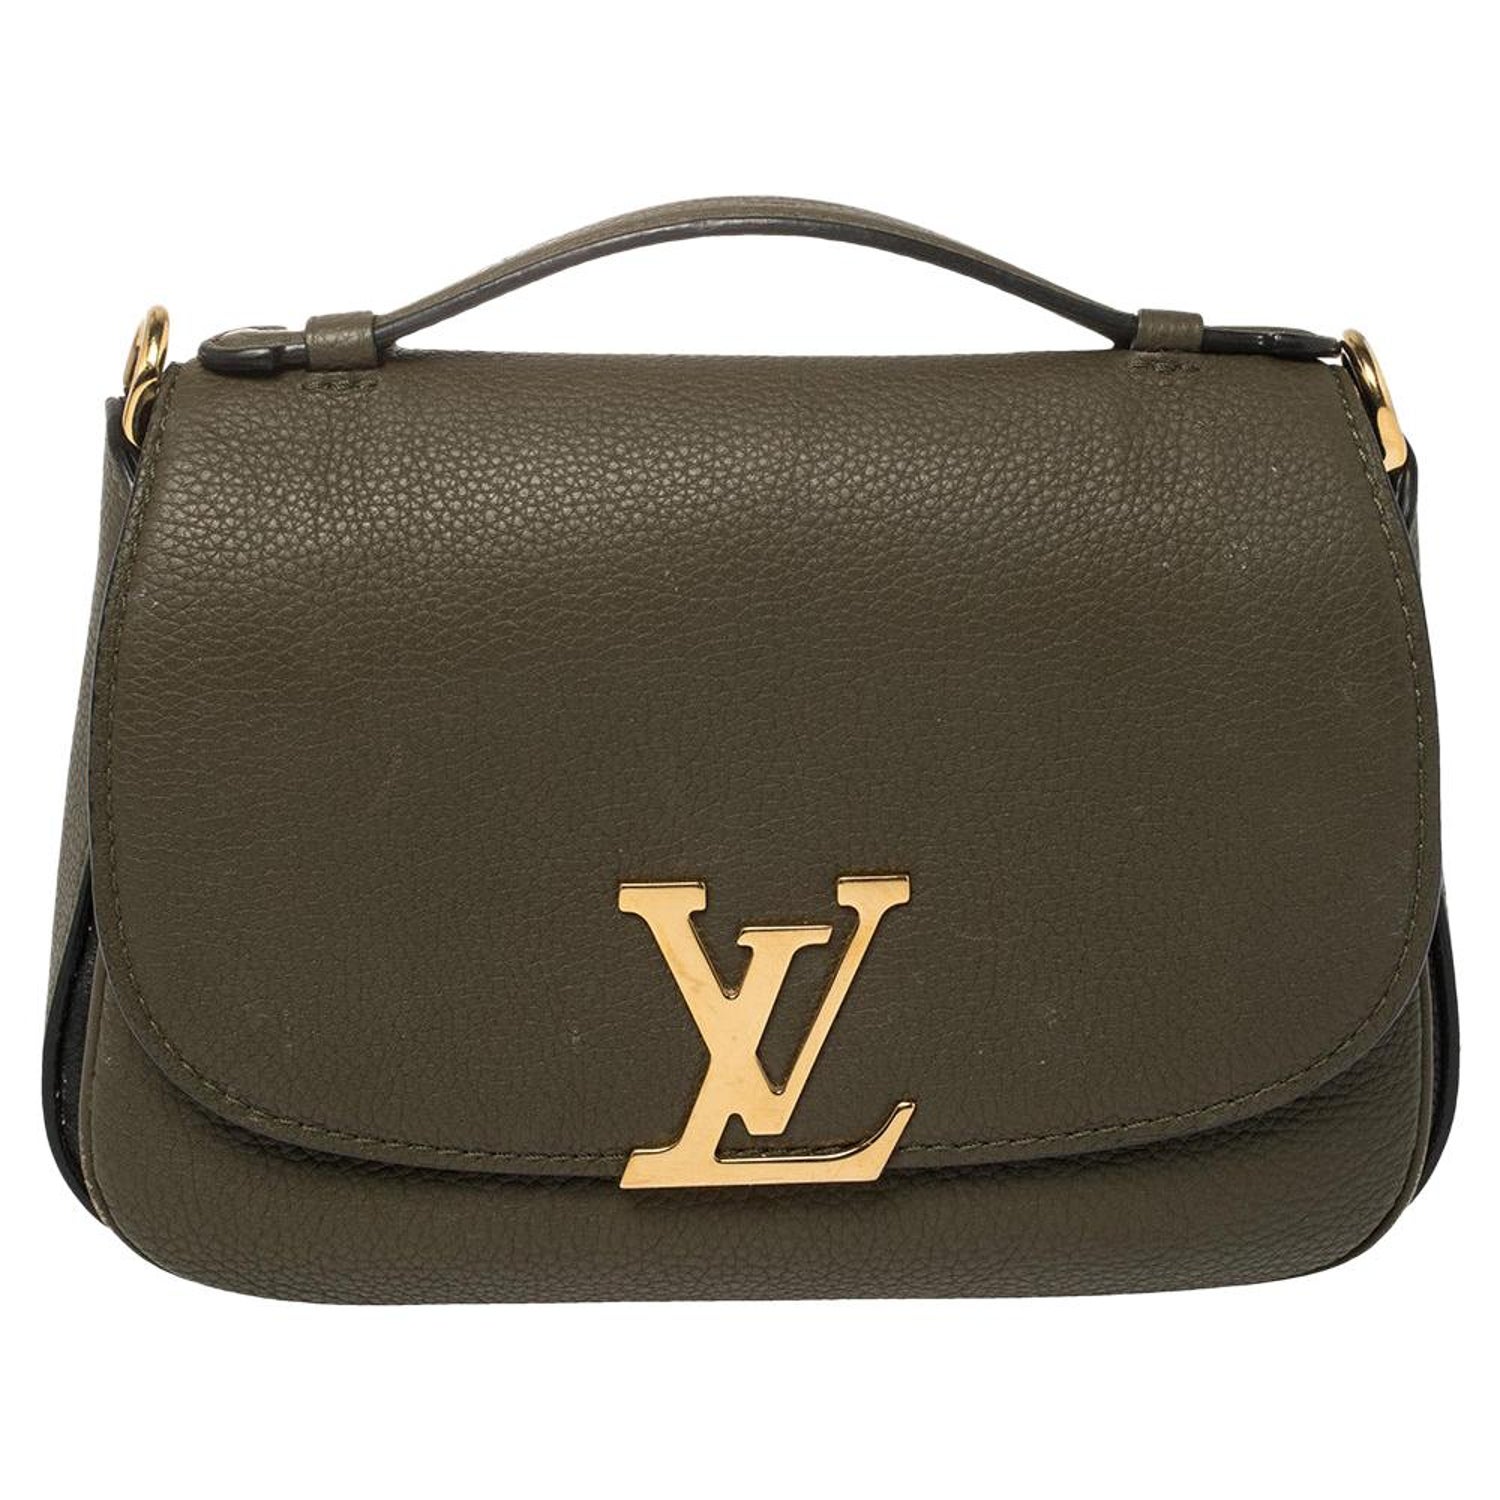 Hollywood Vivienne Epi Leather - Sport and Lifestyle